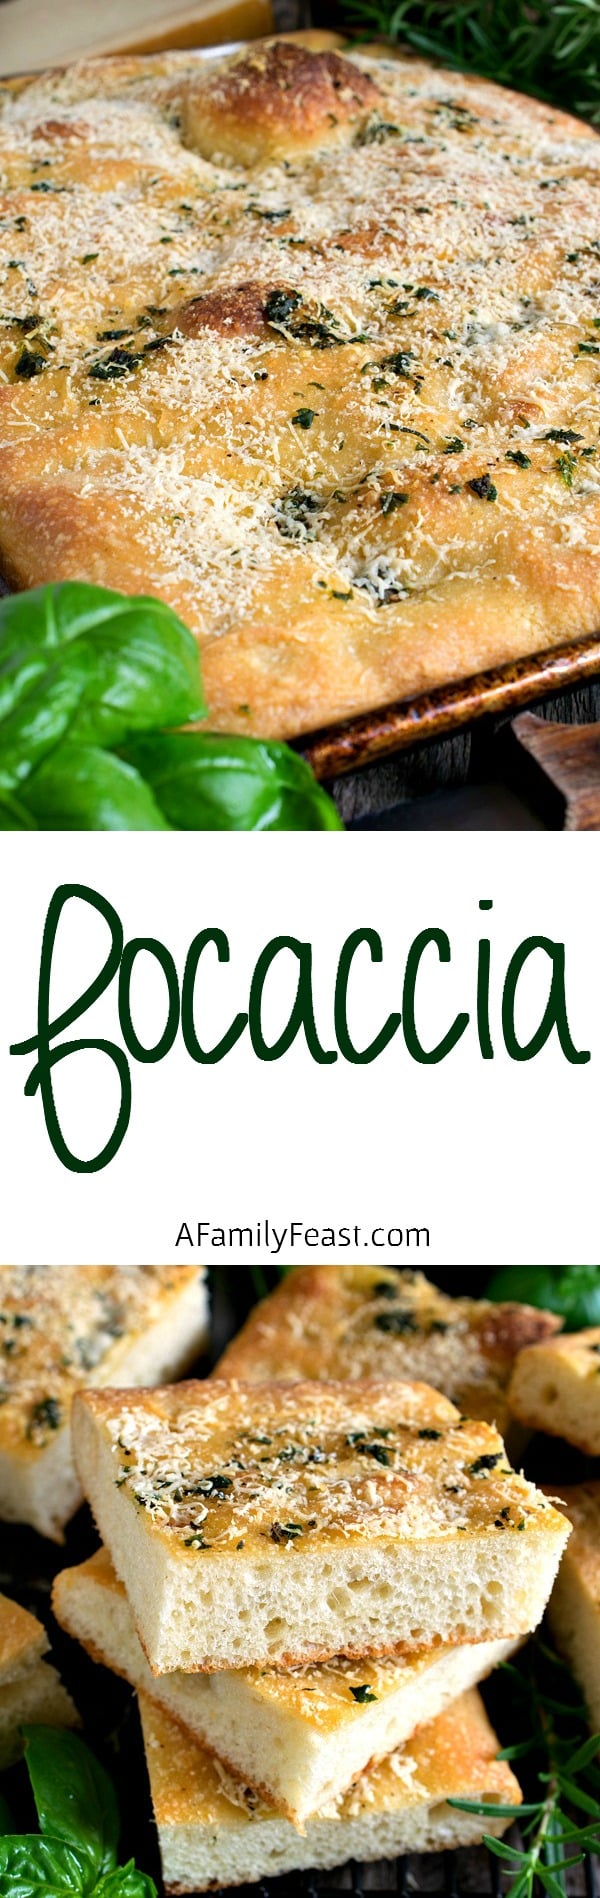 Focaccia - An easy to make homemade Italian bread. This bread is perfection!